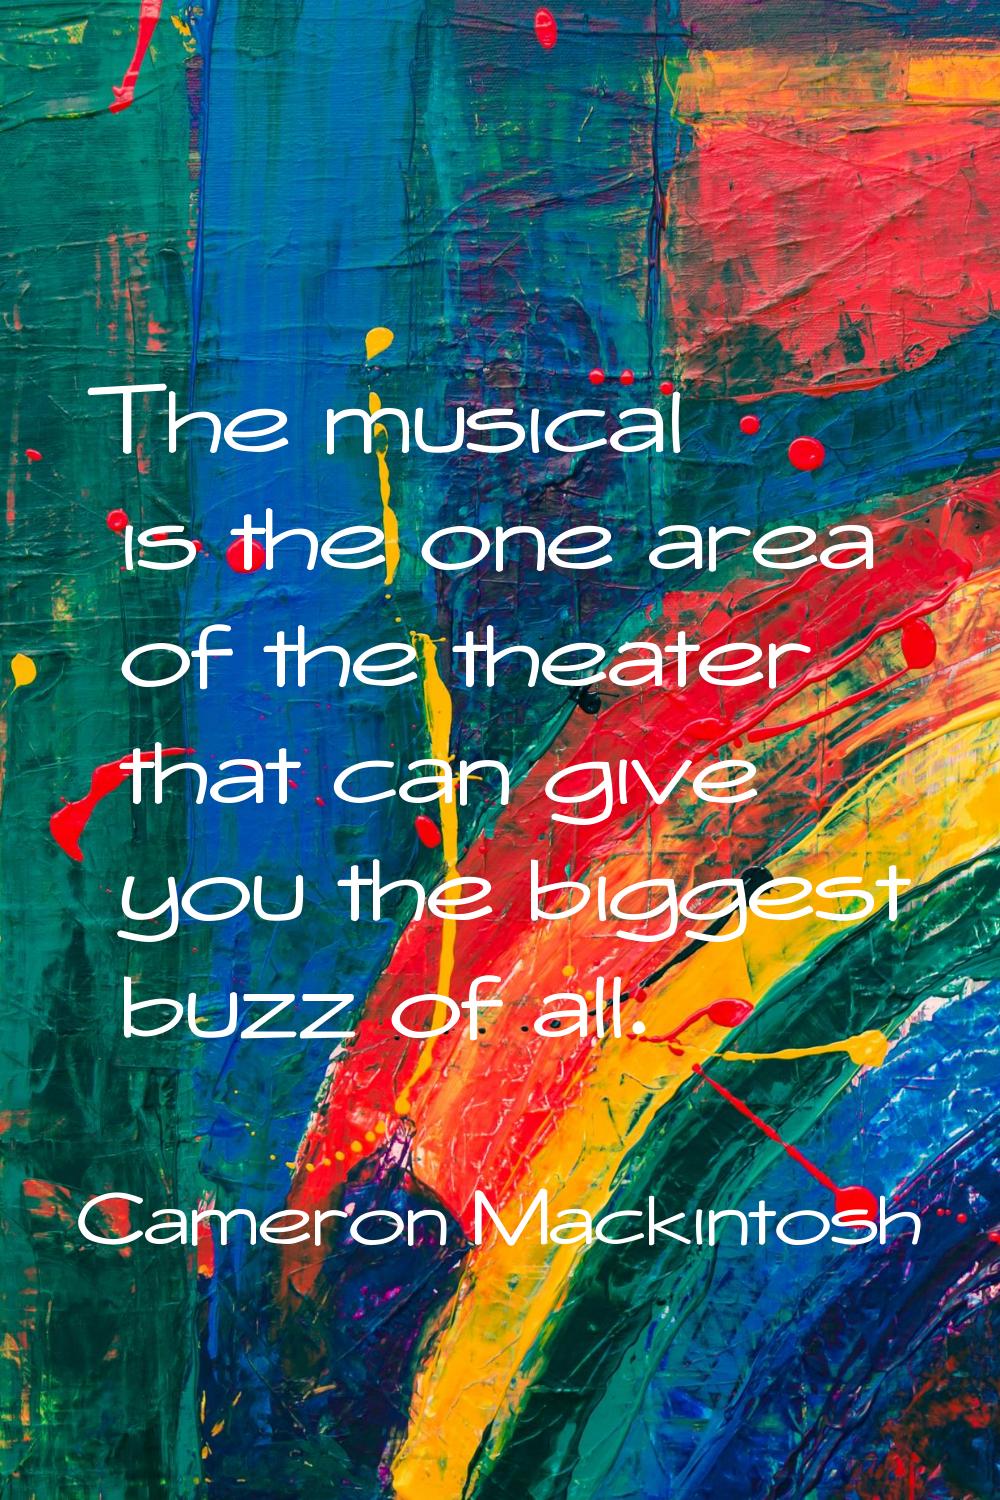 The musical is the one area of the theater that can give you the biggest buzz of all.